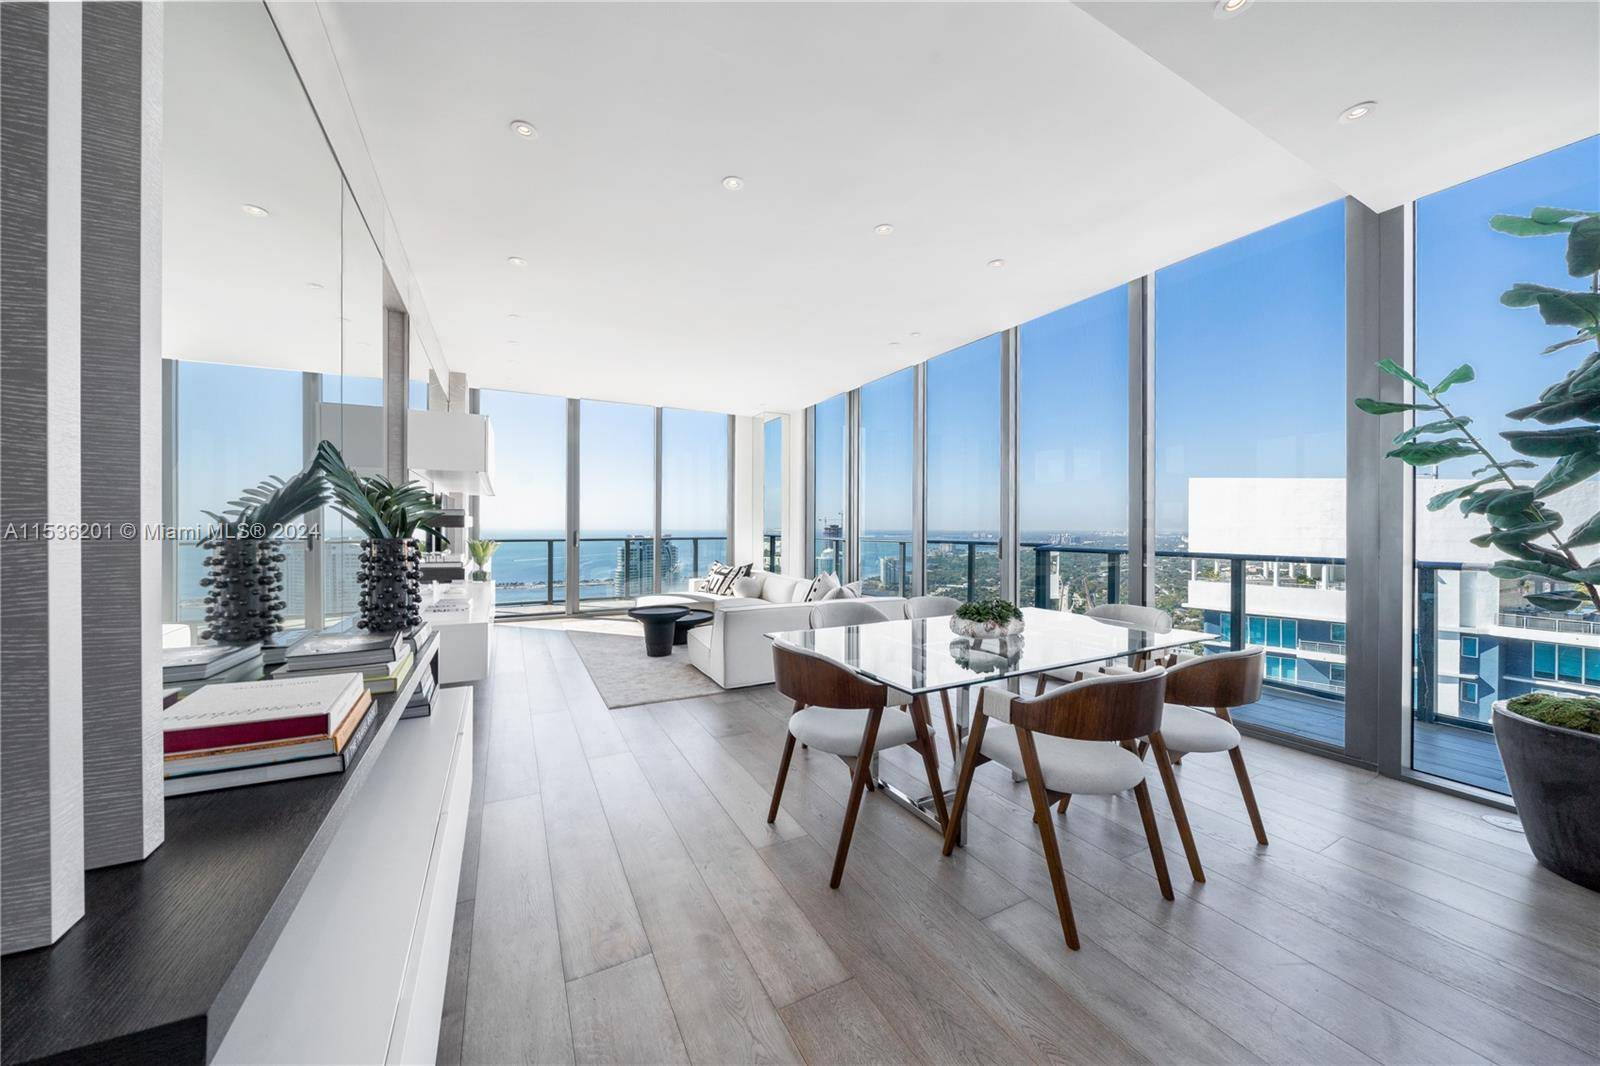 Welcome to Upper Penthouse 4 Brickell Luxury High Rise with your Private Rooftop Terrace and Private Plunge Pool.